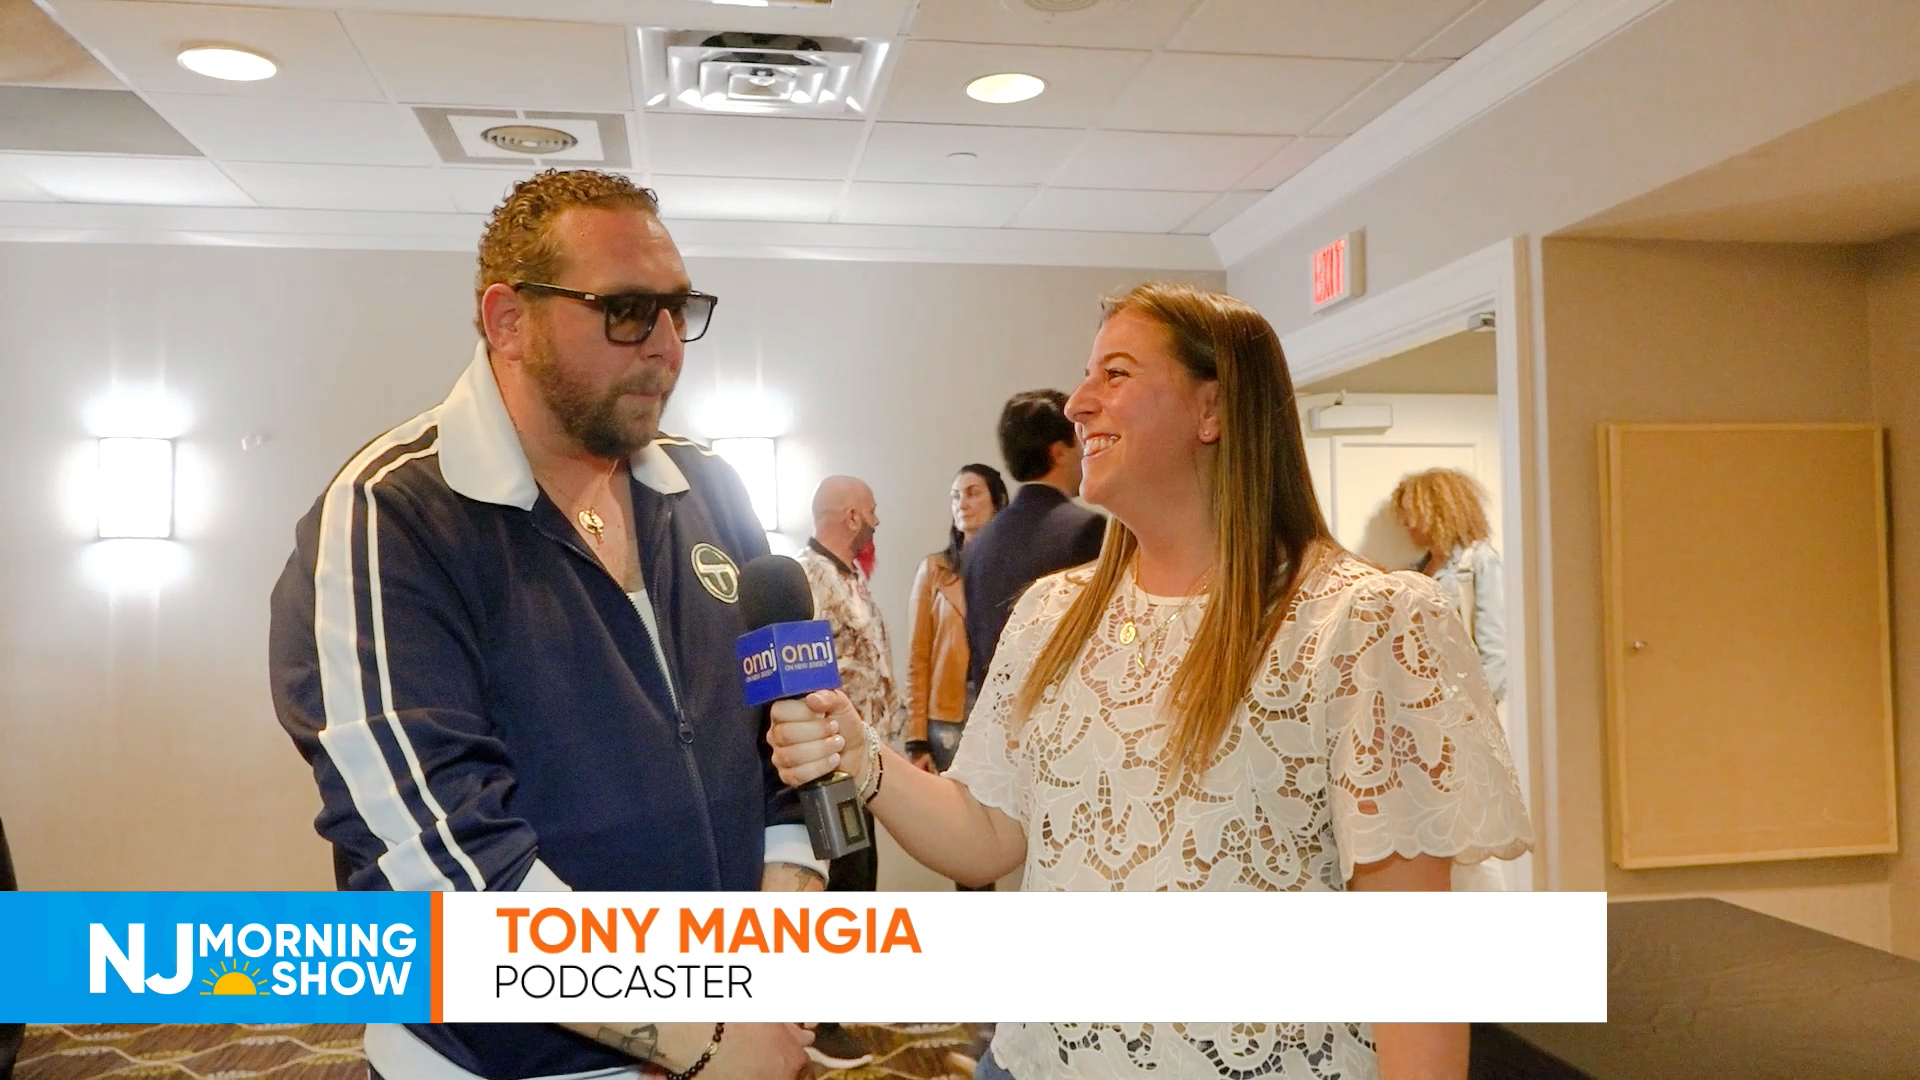 NJ Morning Show – Interview with Tony Mangia at Piasan Con